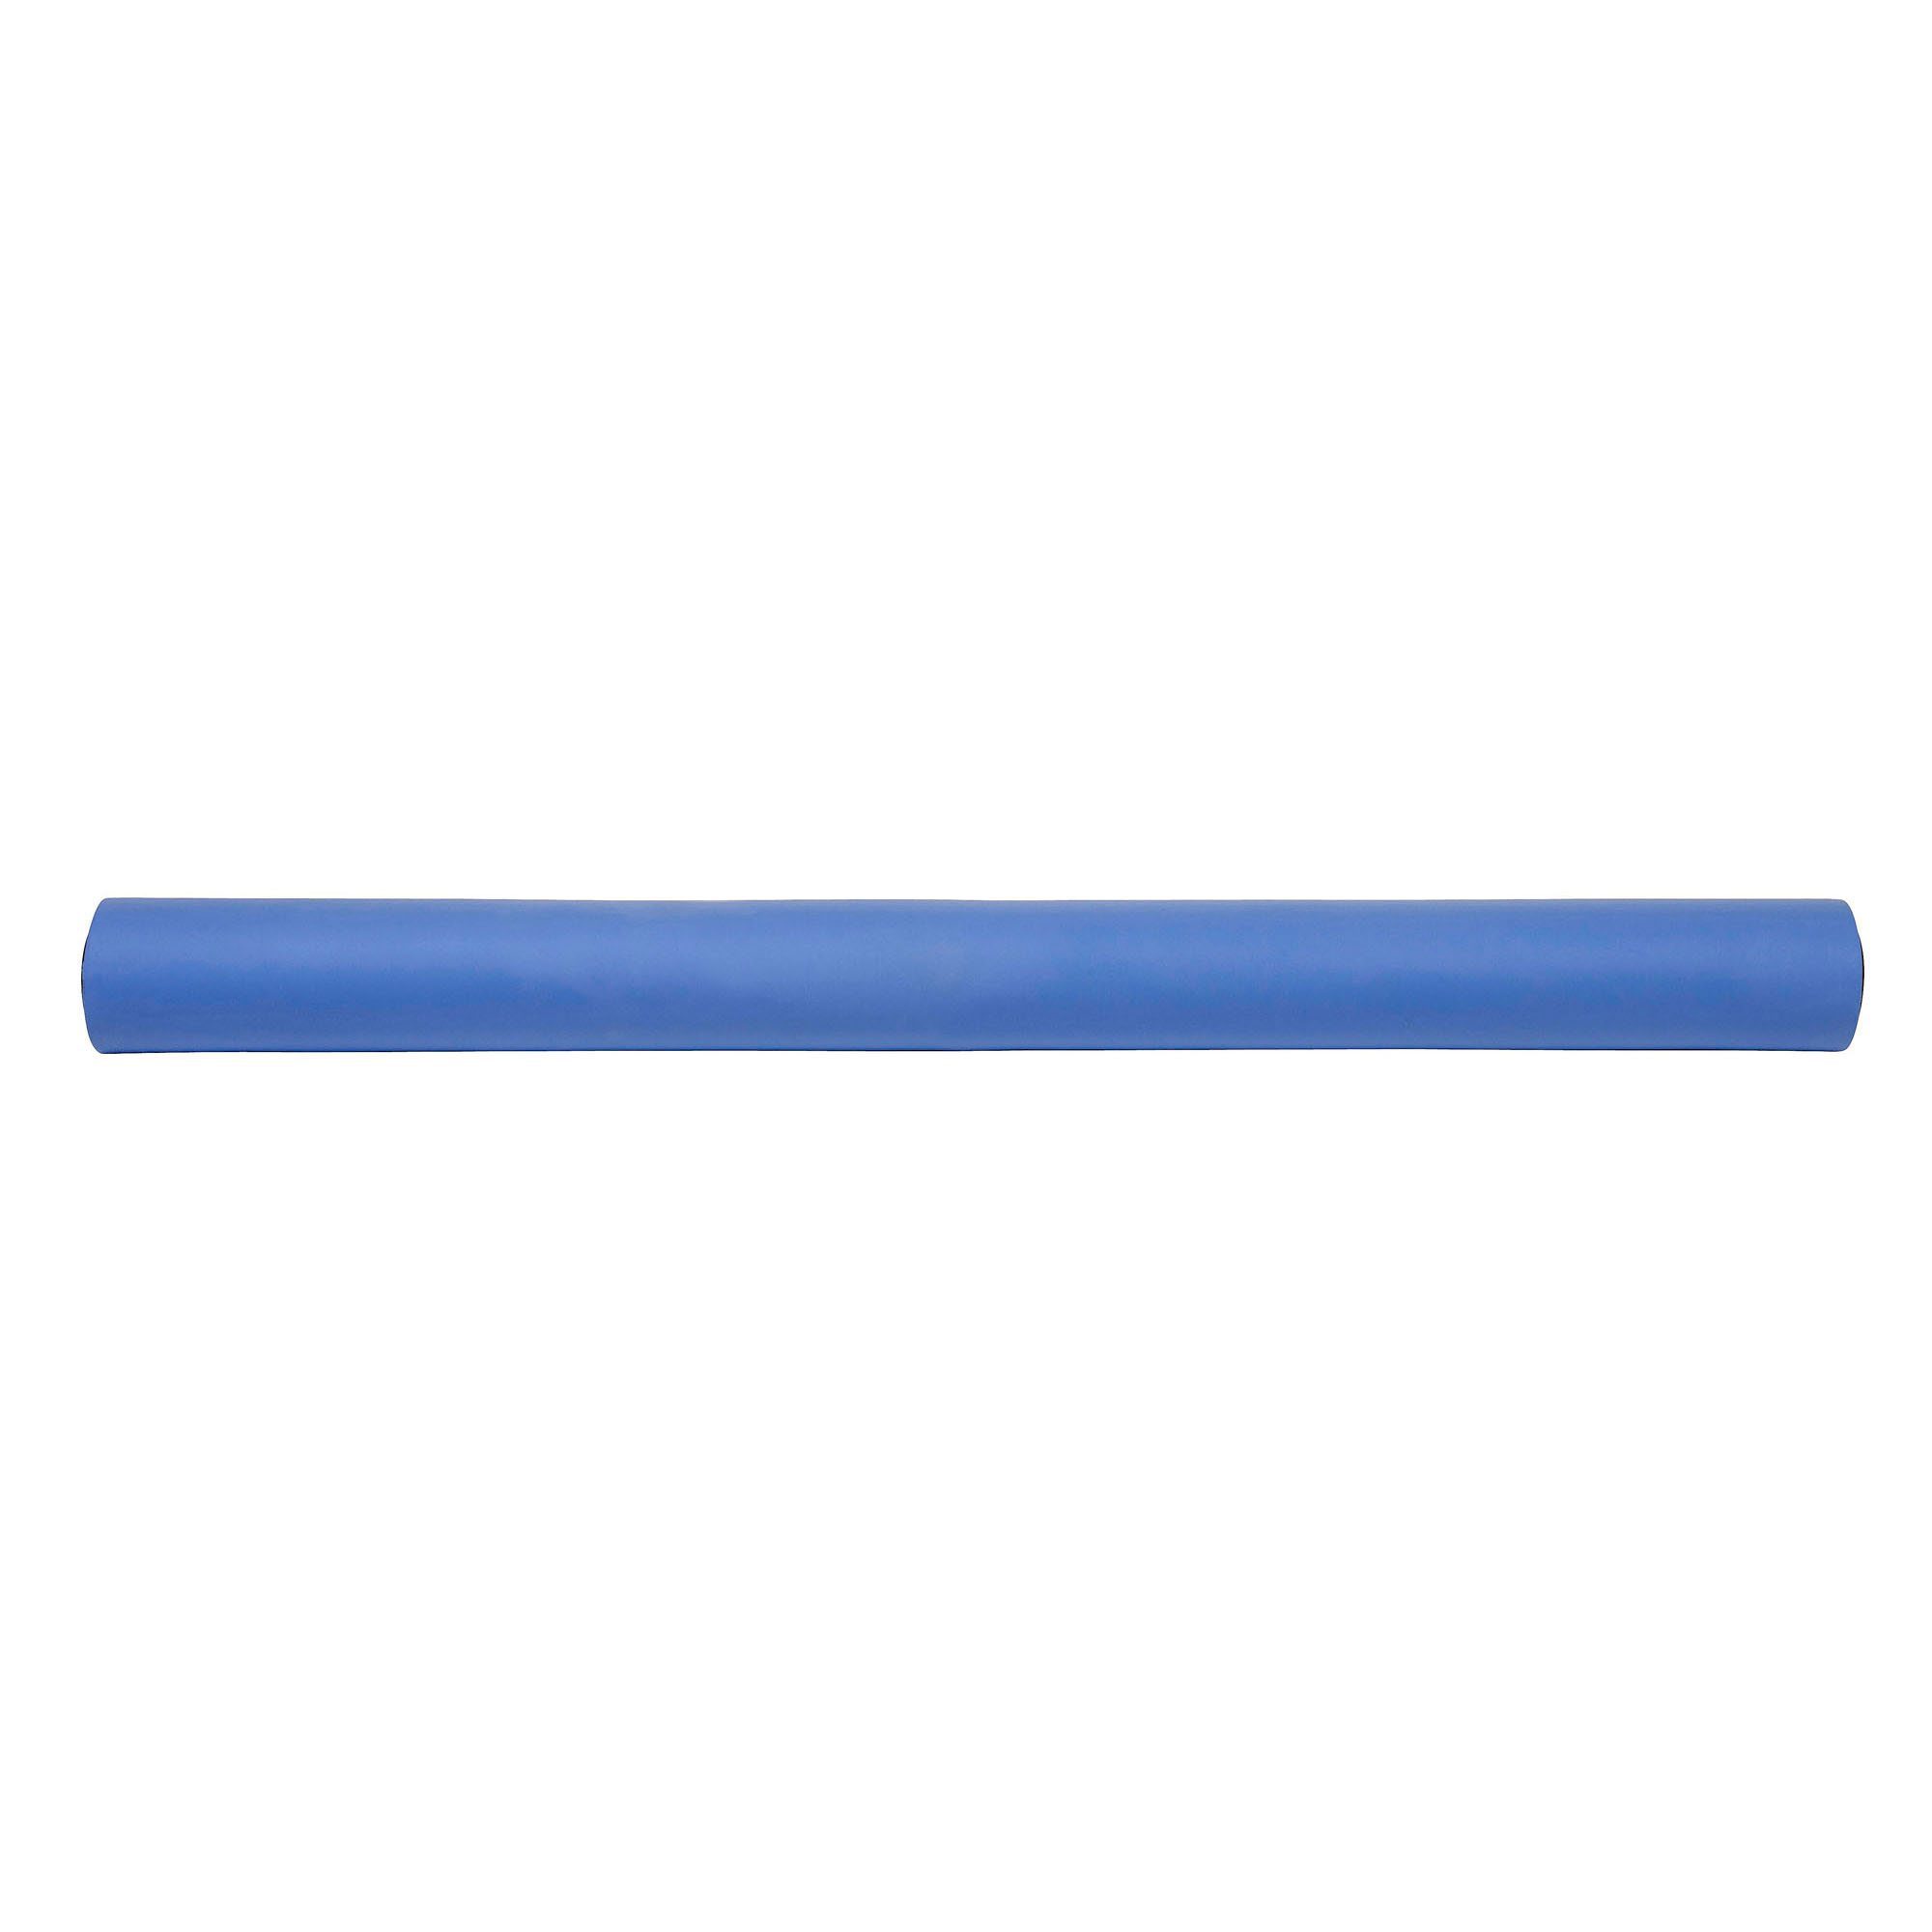 36 inch Replacement Roller Squeegee - Blue